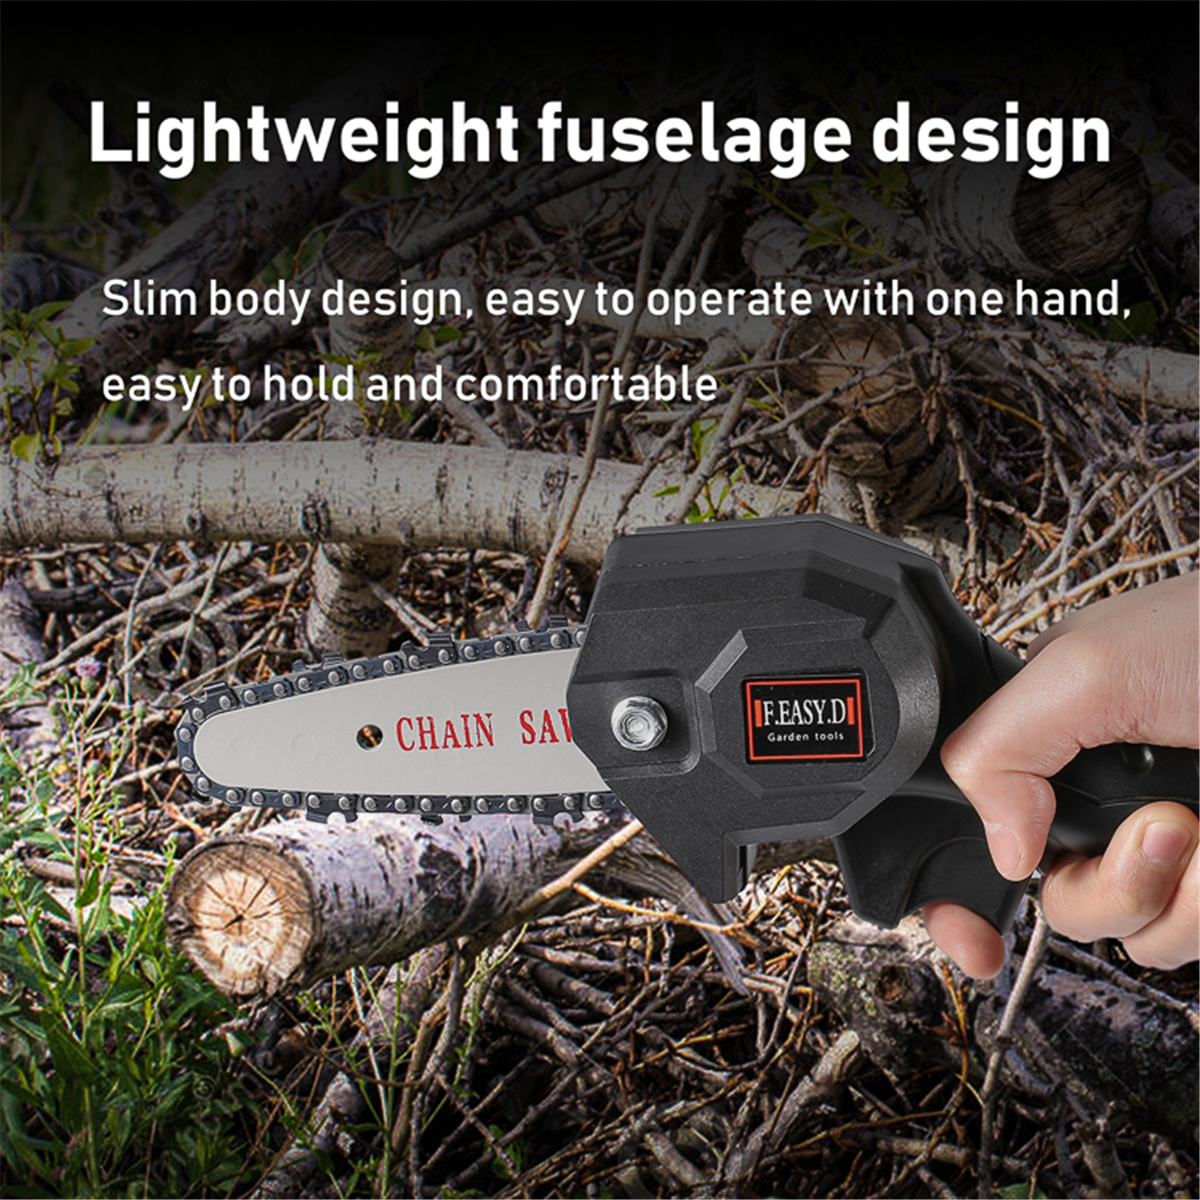 Portable Mini Chainsaw, 4 Inch Cordless Electric Protable Chainsaw with Brushless Motor, 24V Electric Hand Chainsaw, One-Hand Lightweight Chainsaw, Great for Tree Branch Wood Cutting - image 7 of 7